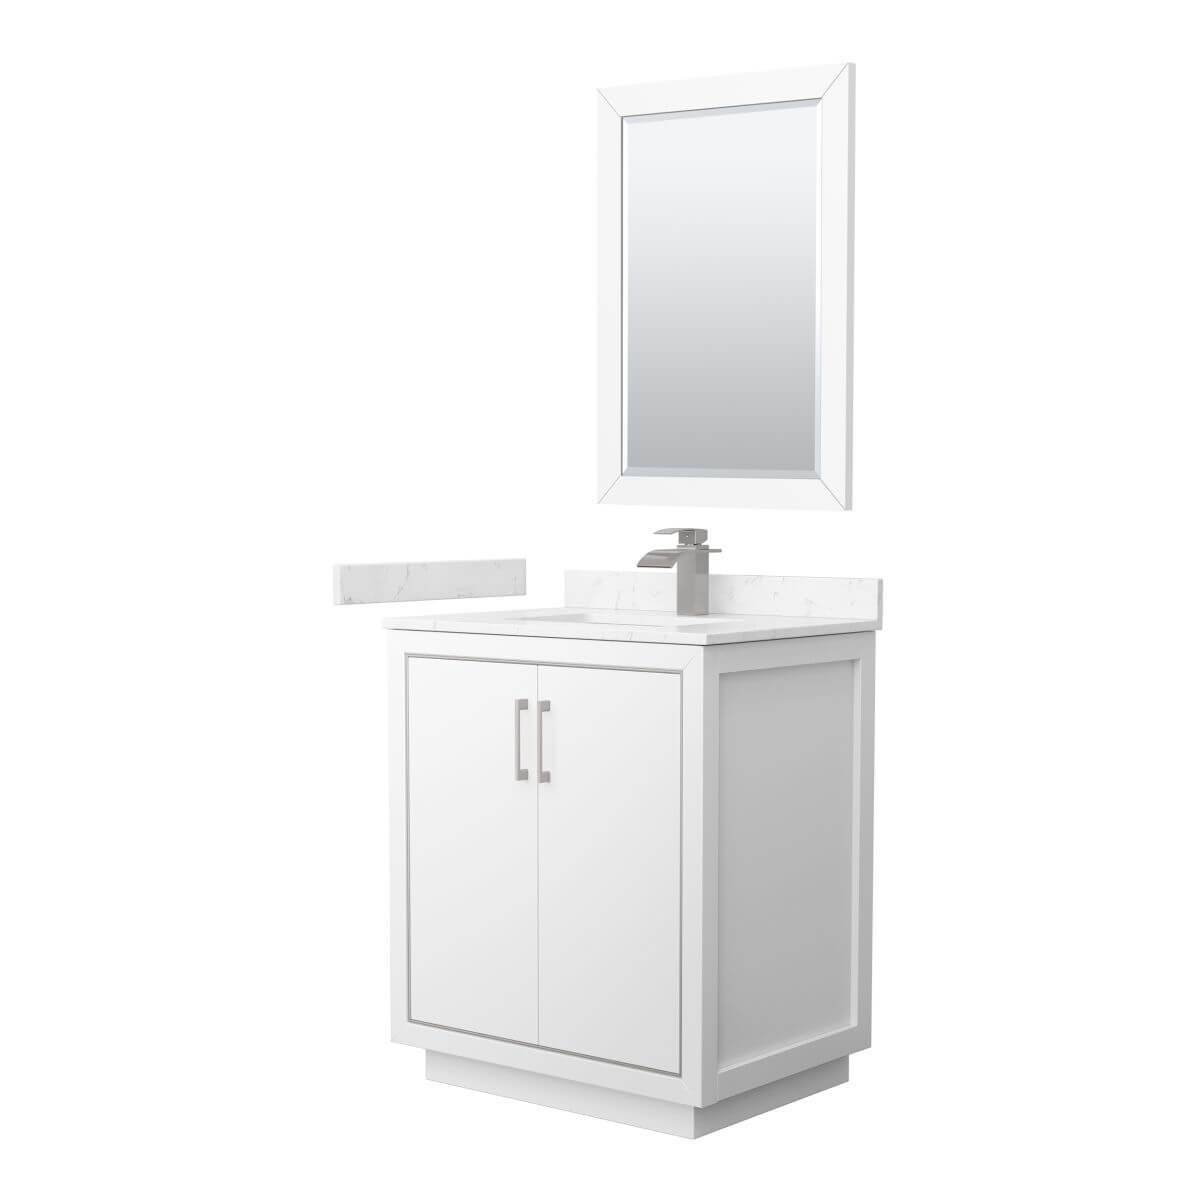 Wyndham Collection WCF111130SWHC2UNSM24 Icon 30 inch Single Bathroom Vanity in White with Carrara Cultured Marble Countertop, Undermount Square Sink, Brushed Nickel Trim and 24 Inch Mirror